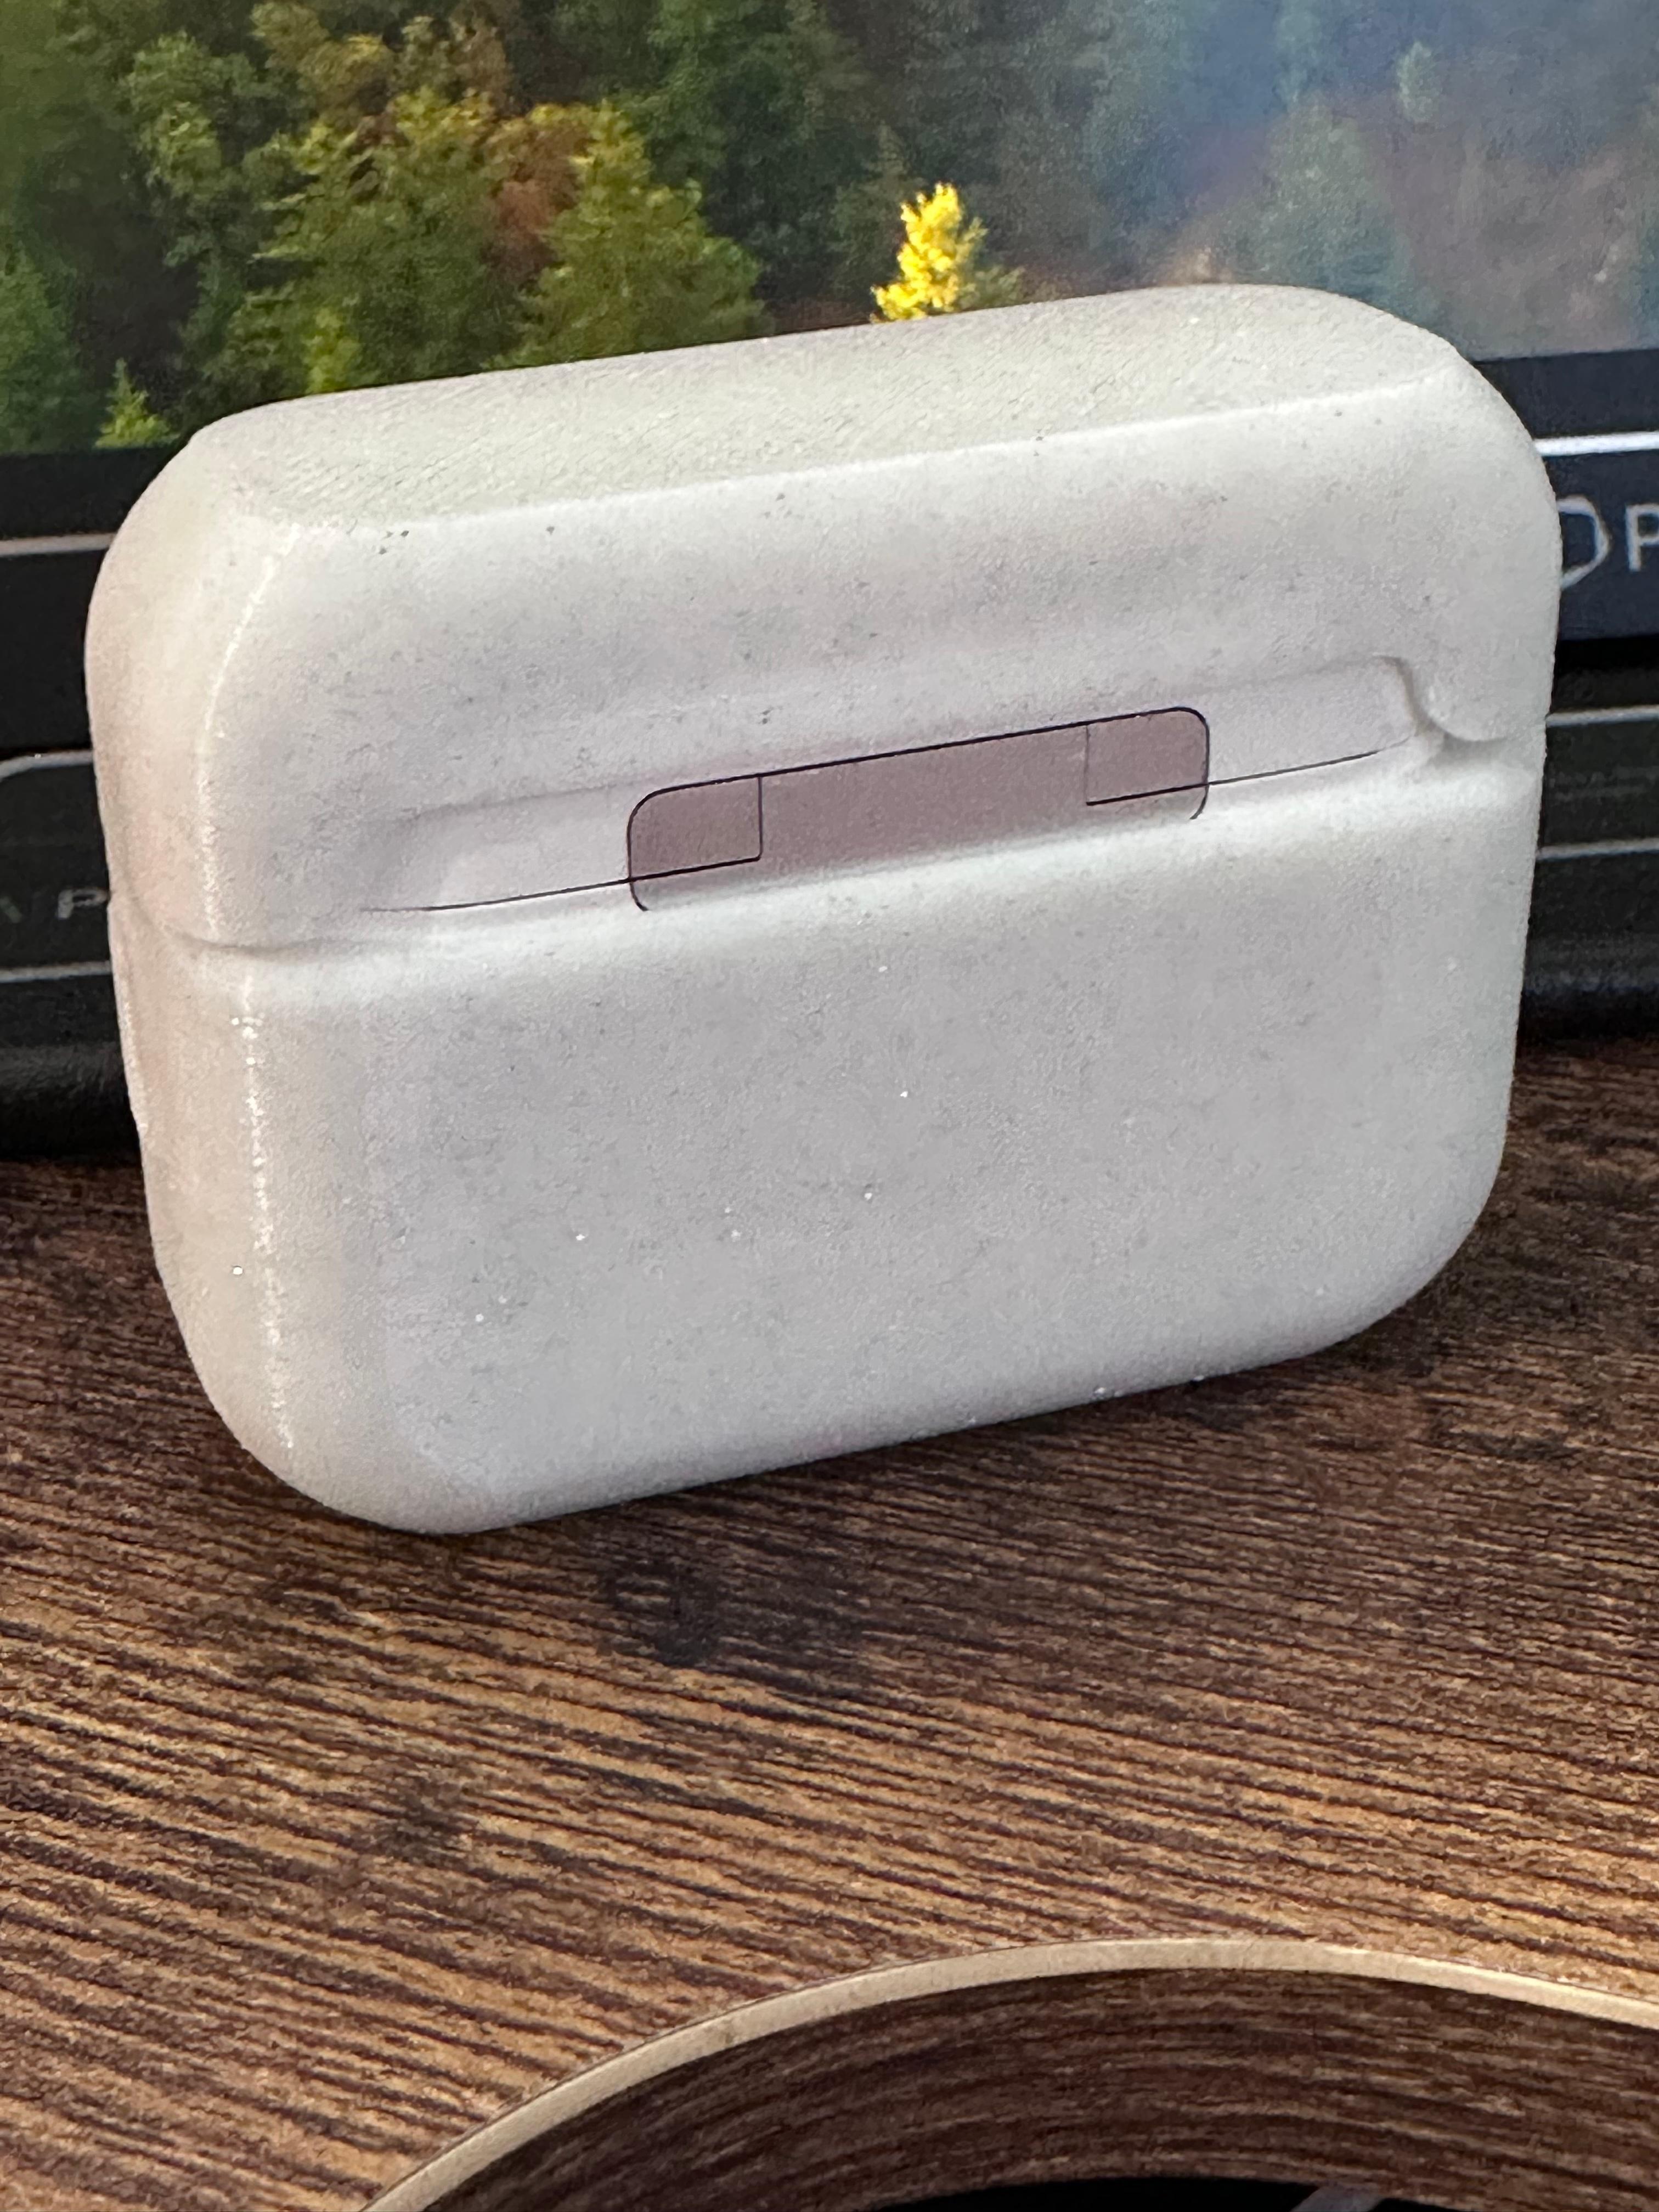 KNURLED AIRPOD CASE - APPLE AIRPODS PRO 3d model